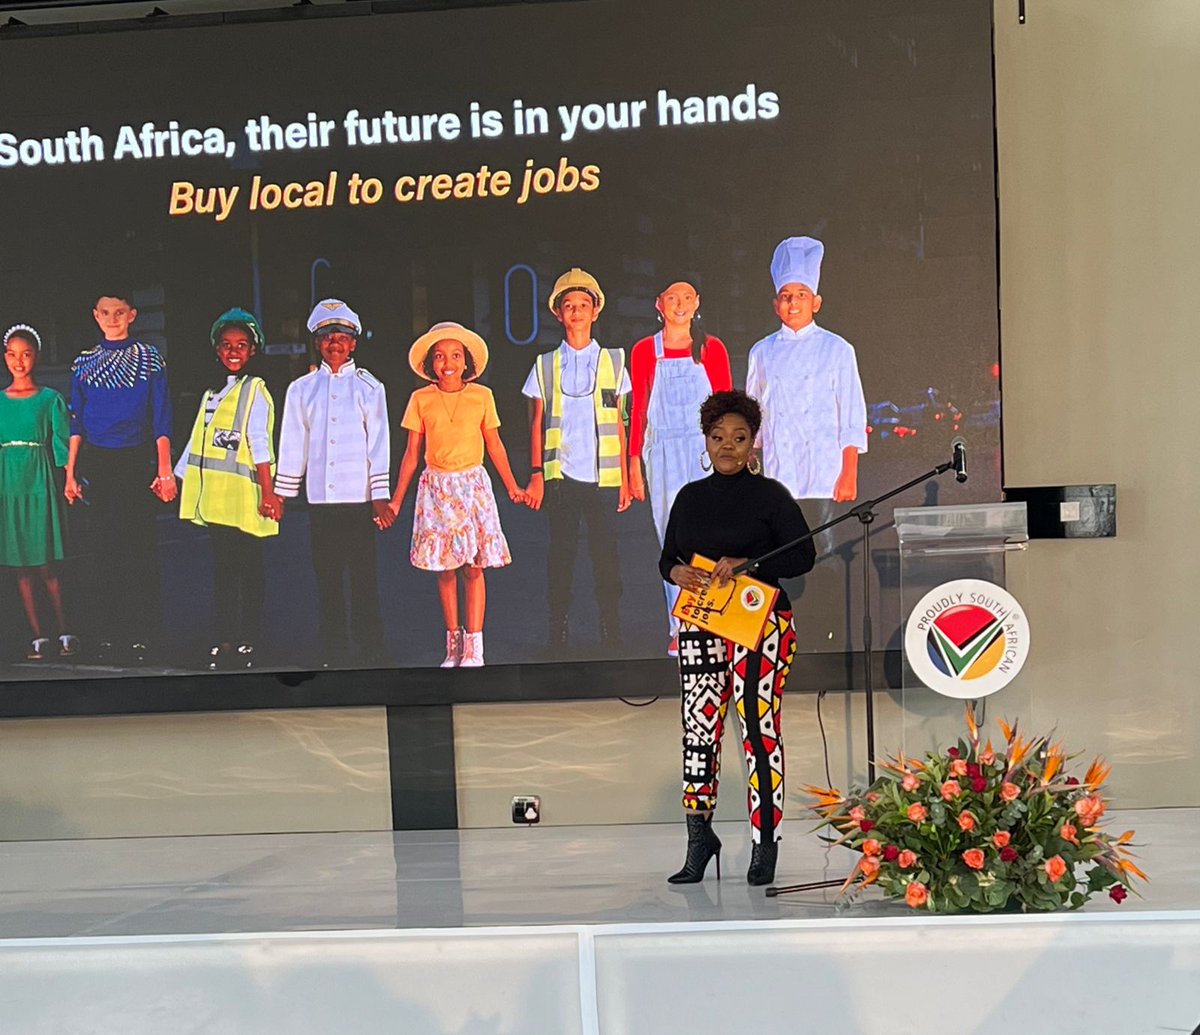 Today, @ProudlySA is launching a campaign focusing on creating jobs and reminding South Africans to buy local. This campaign features young children who are in different fields, setting the scene for the future. #BuyLocalToCreateJobs #LivingLekkerLocally